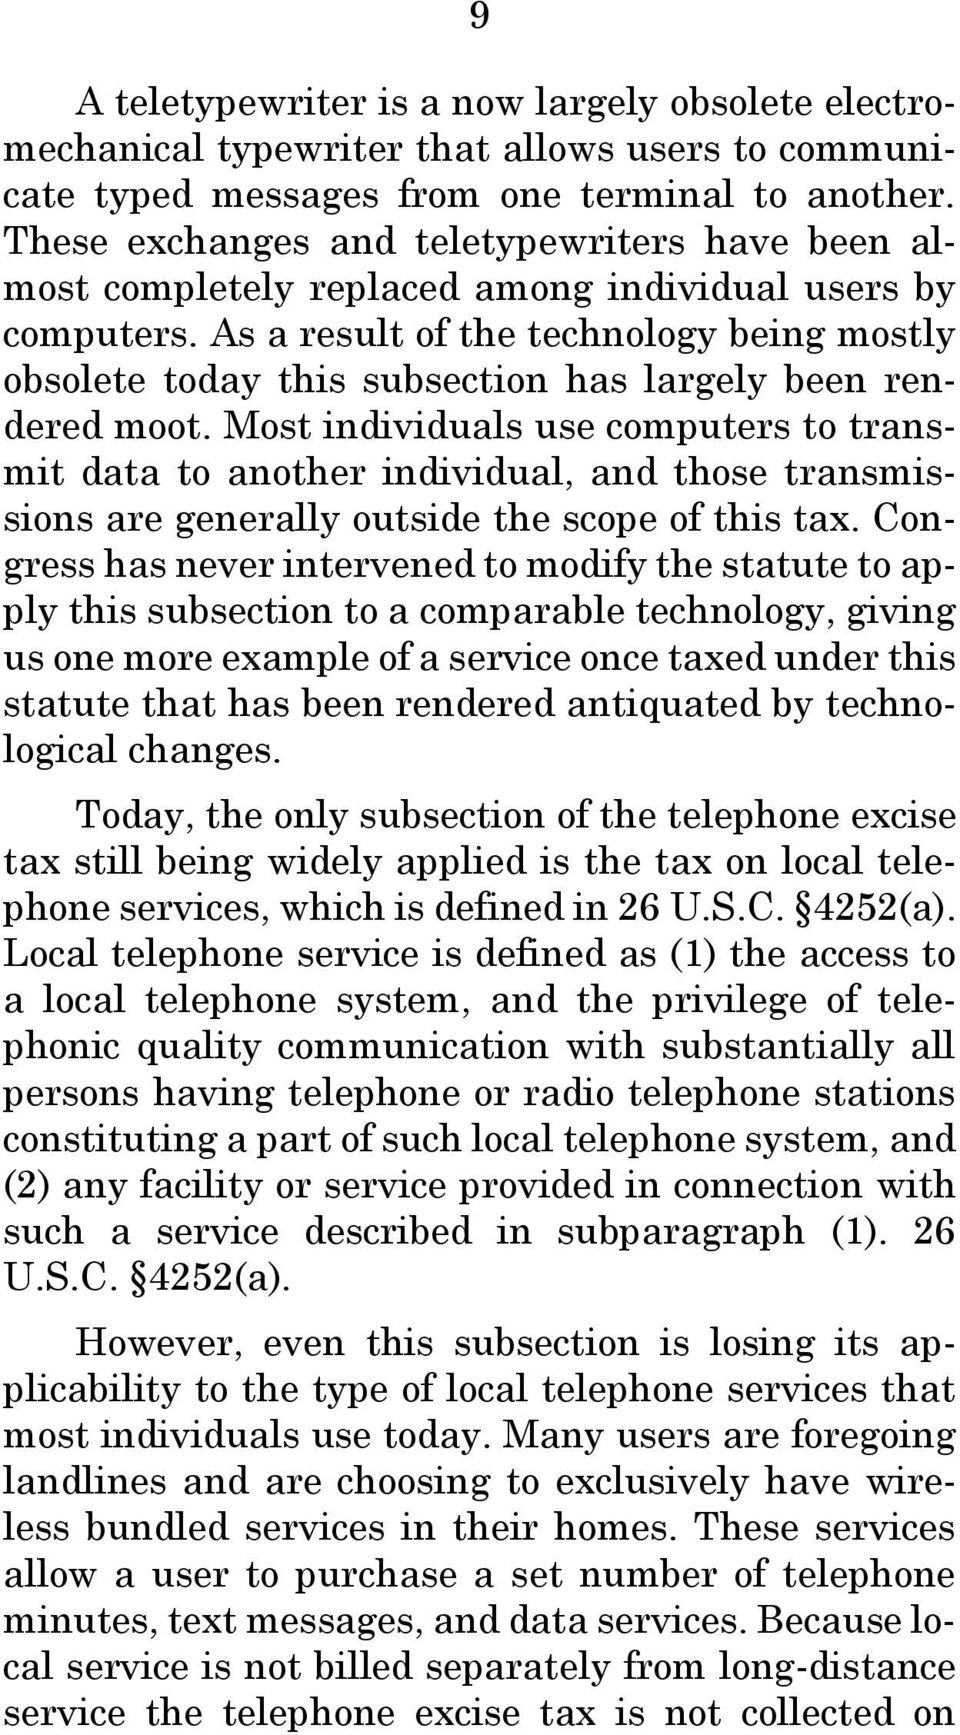 As a result of the technology being mostly obsolete today this subsection has largely been rendered moot.